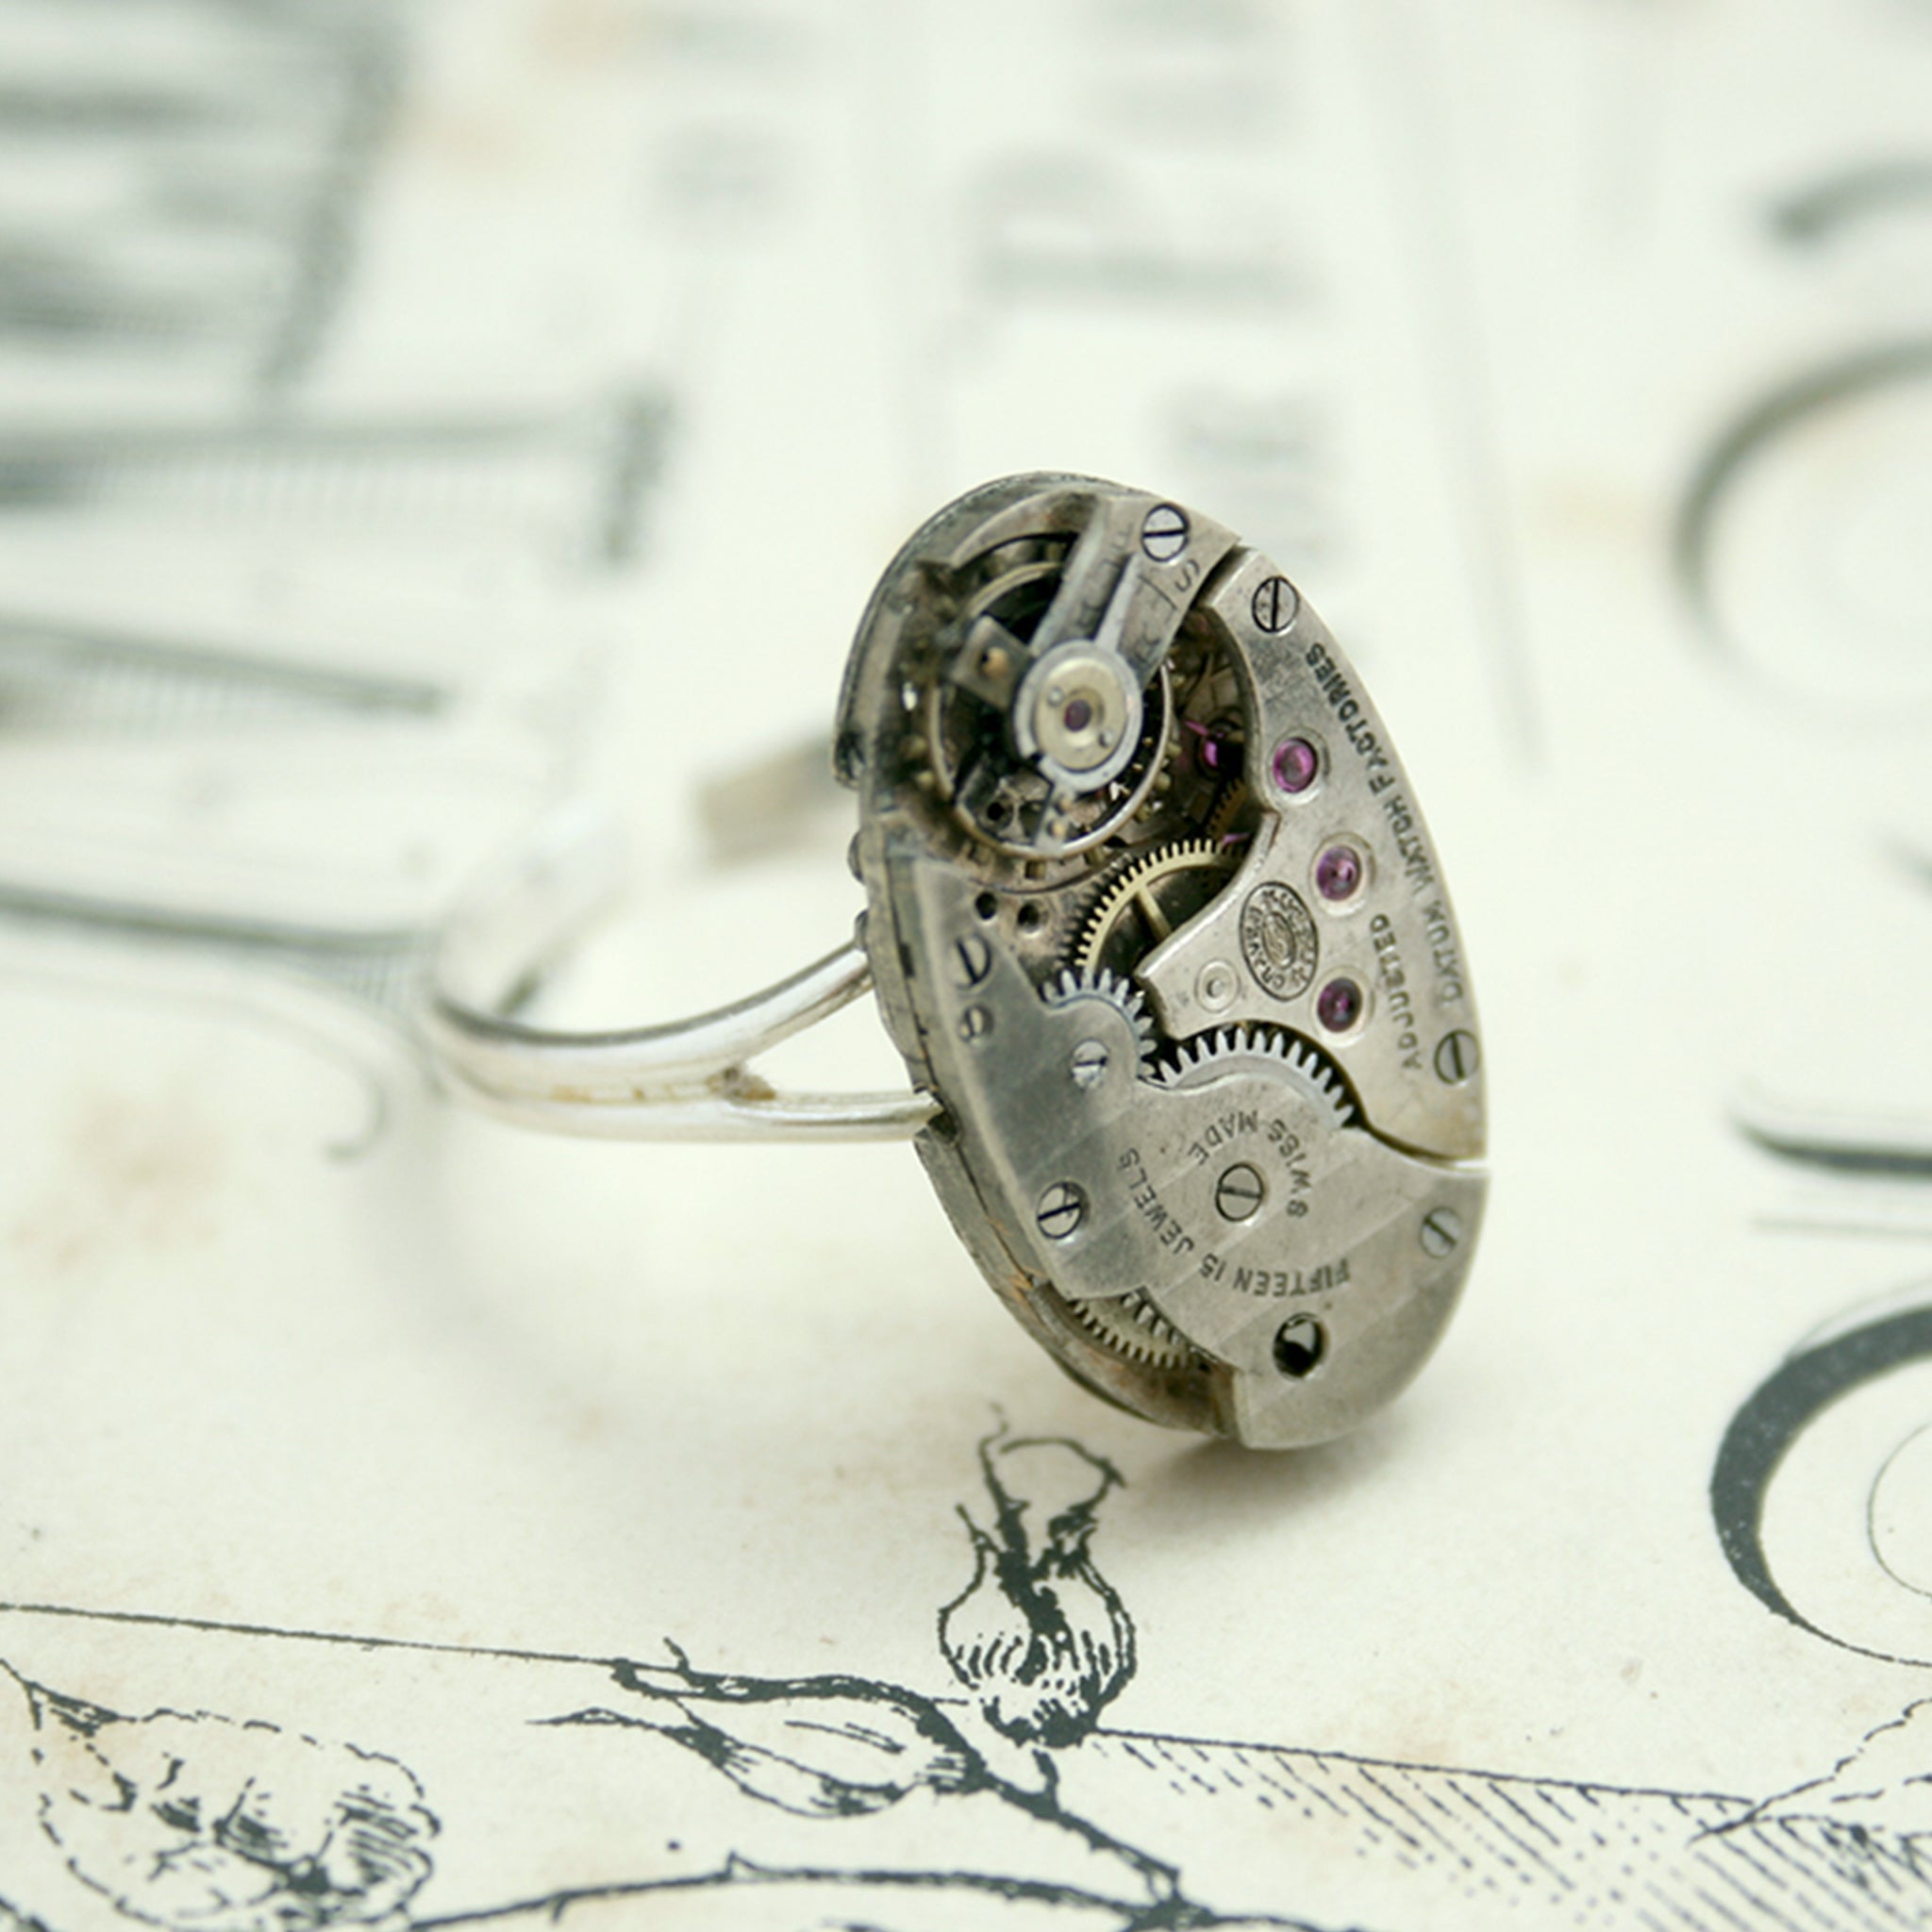 Cocktail Ring with Oval Steampunk Watch on Sterling Silver adjustable band